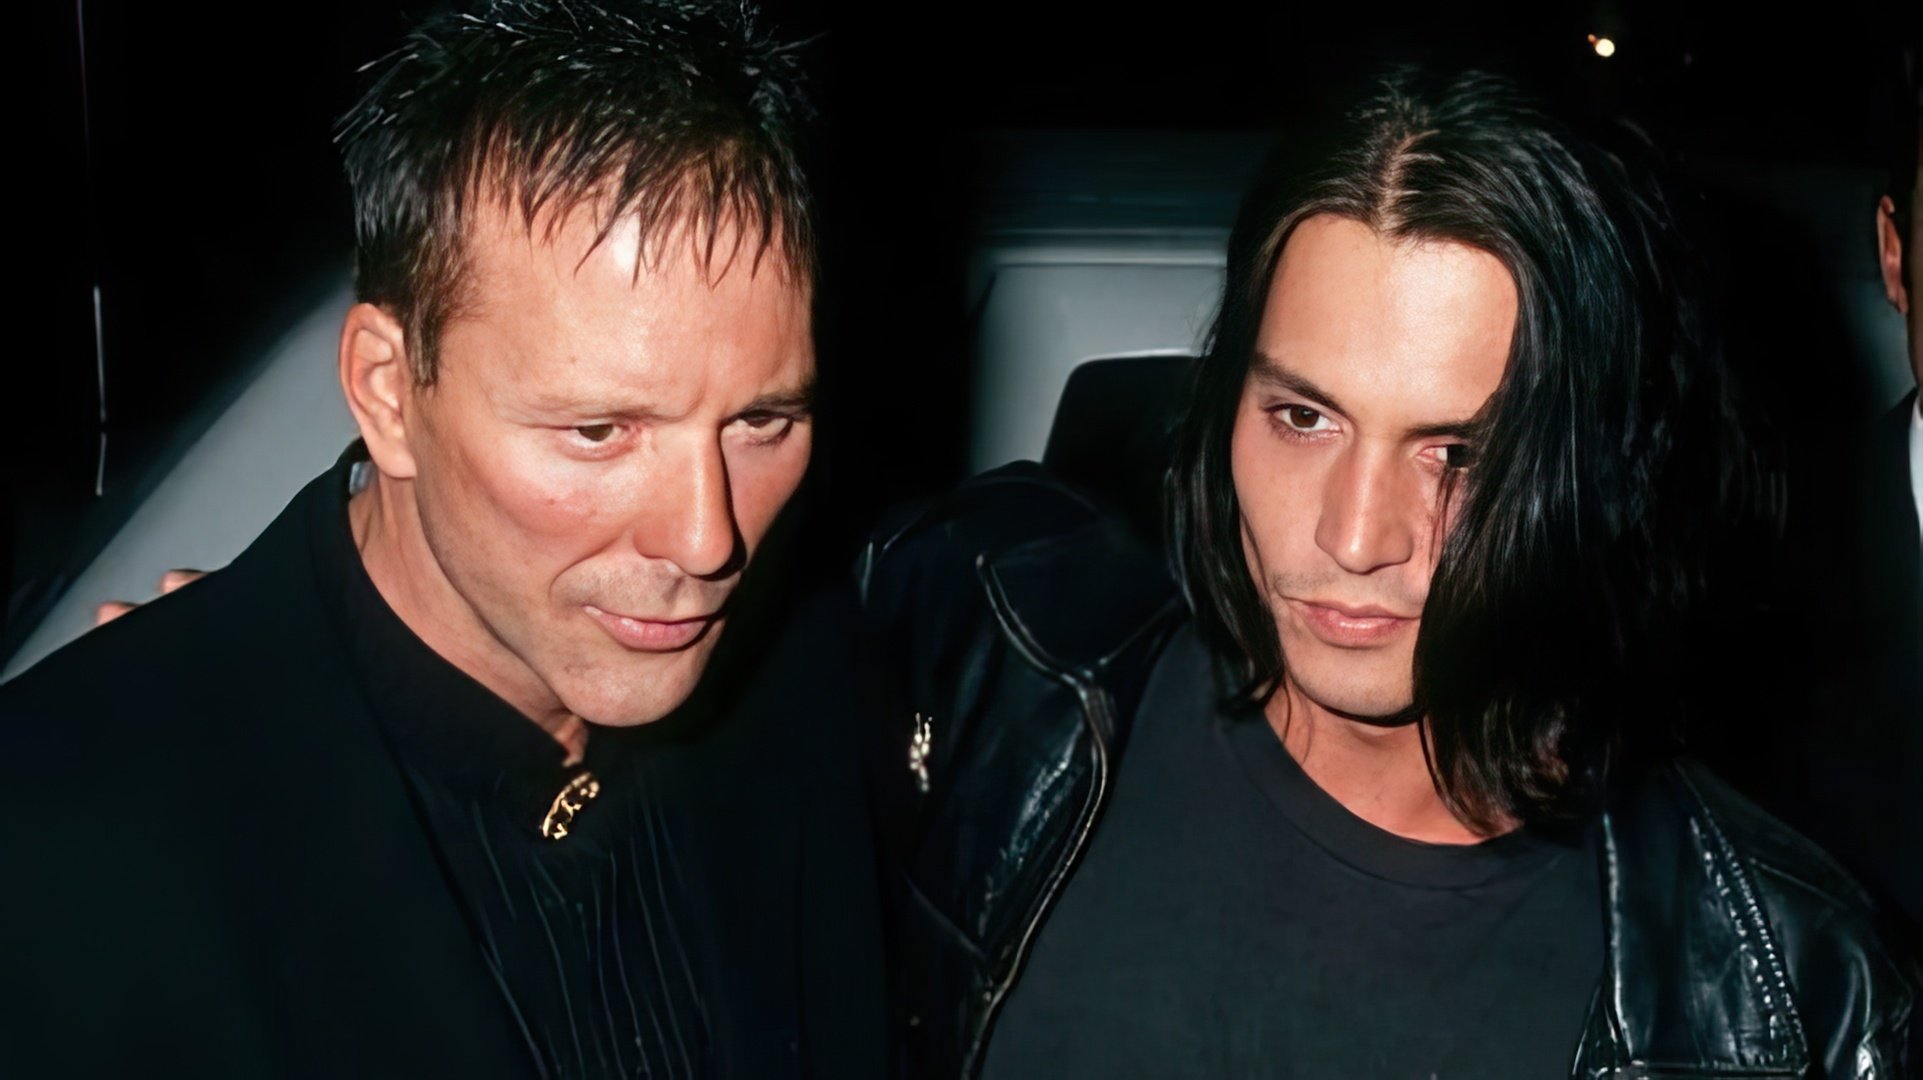 Mickey Rourke and Johnny Depp have been friends since the 90s